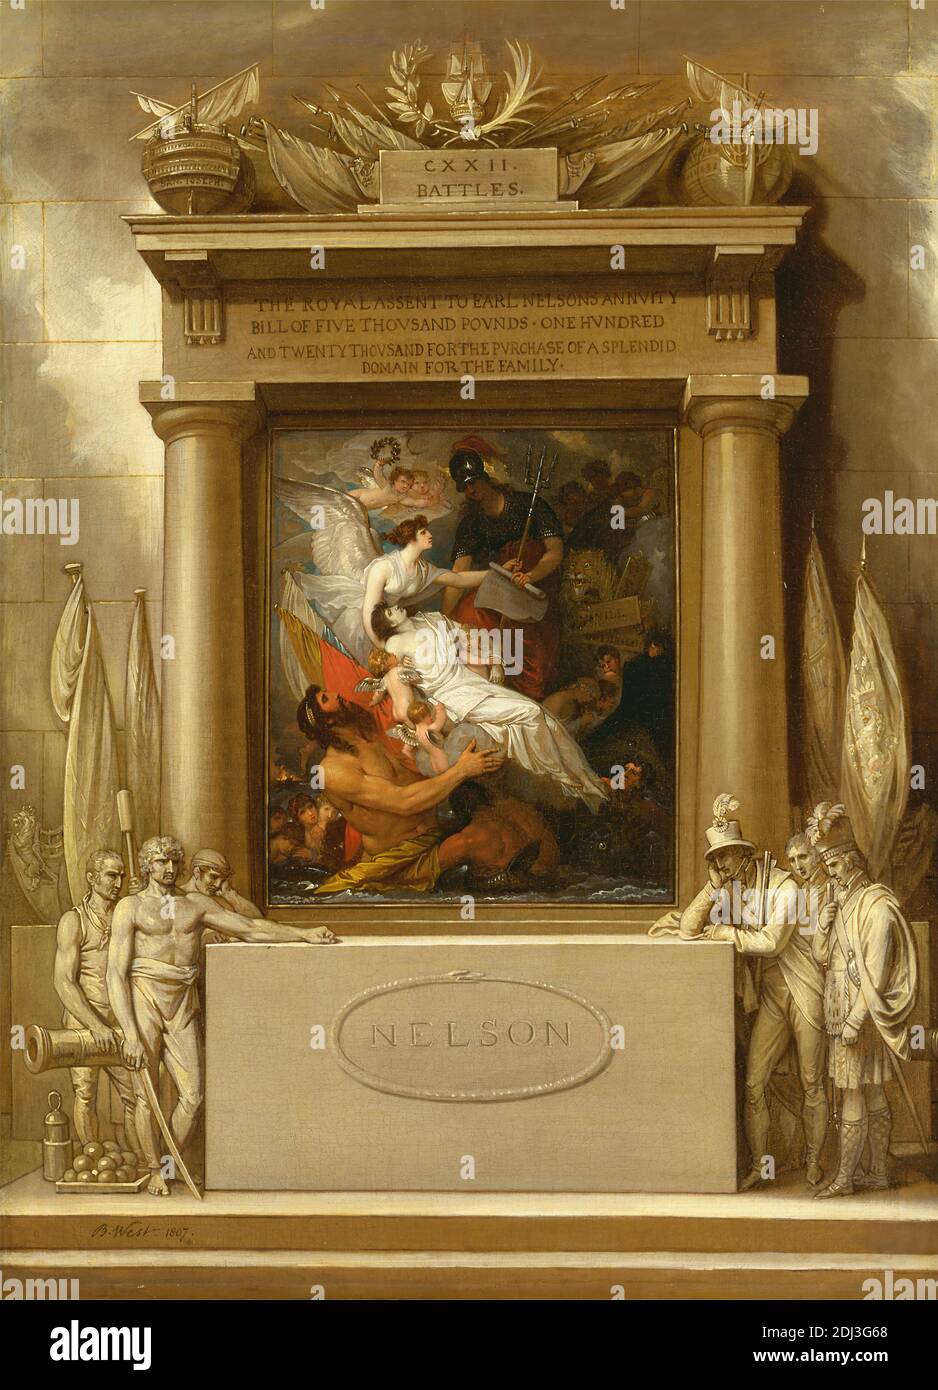 The Apotheosis of Nelson, Benjamin West, 1738–1820, American, active in Britain (from 1763), 1807, Oil on canvas, Support (PTG): 39 1/2 x 29 inches (100.3 x 73.7 cm), admiral, allegory, architectural subject, babies, cannon, cannonballs, cherubs, children, columns (architectural elements), costume, death, divine, engraving (incising), flags, hero, laurel, lifting, lion, memorial, men, military art, monument, mythology, painting (visual work), raising (lifting), relief (sculpture), sculpture, sea, shelf, ships, soldiers, sword, triumph, trompe-l'oeil, women Stock Photo